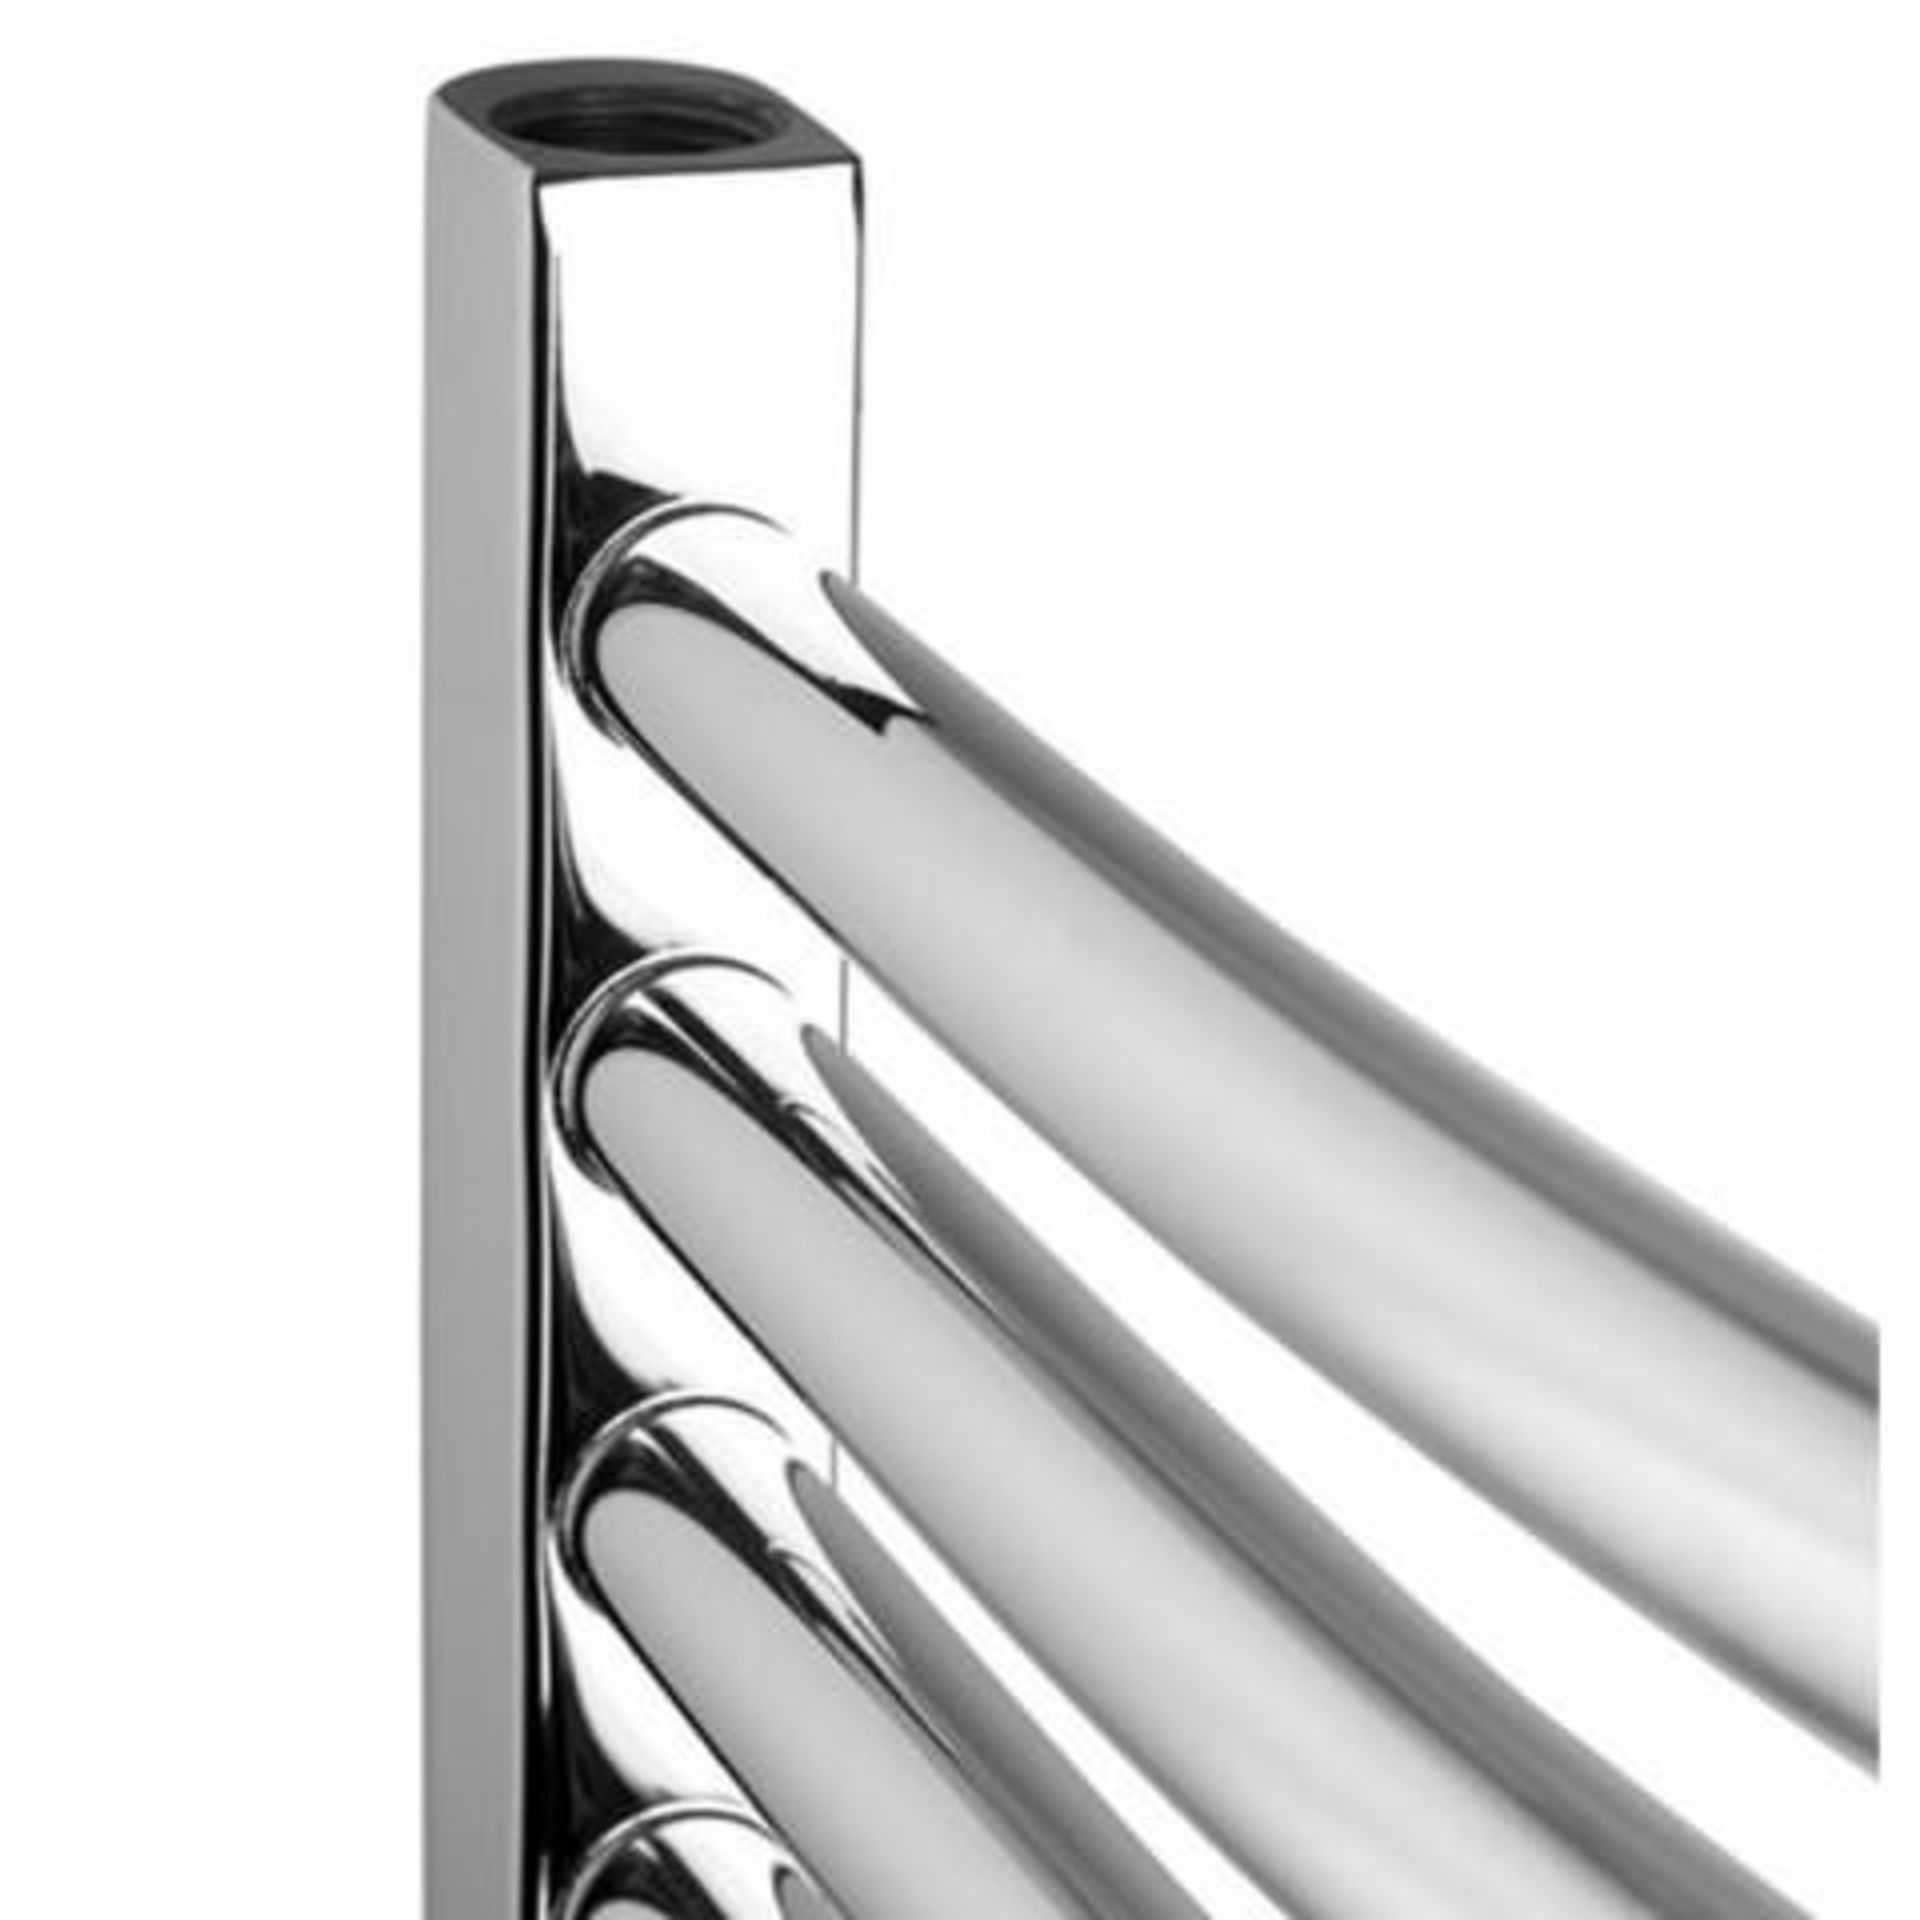 1200x600mm - 20mm Tubes - RRP £219.99 each.Chrome Curved Rail Ladder Towel Radiator. Our Nanc... - Image 3 of 3